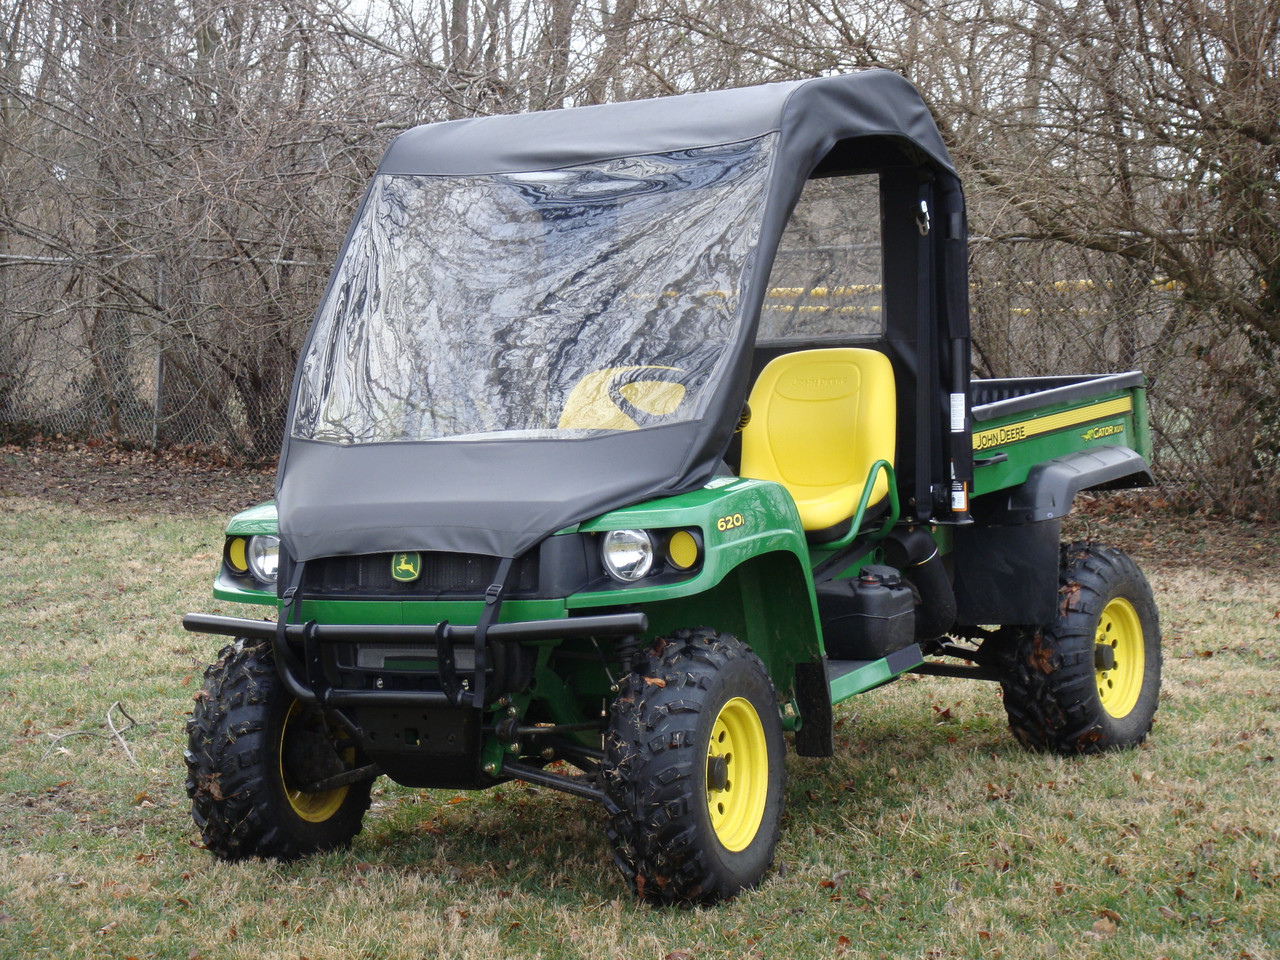 3 Star side x side John Deere HPX/XUV vinyl windshield, top and rear window front angle view